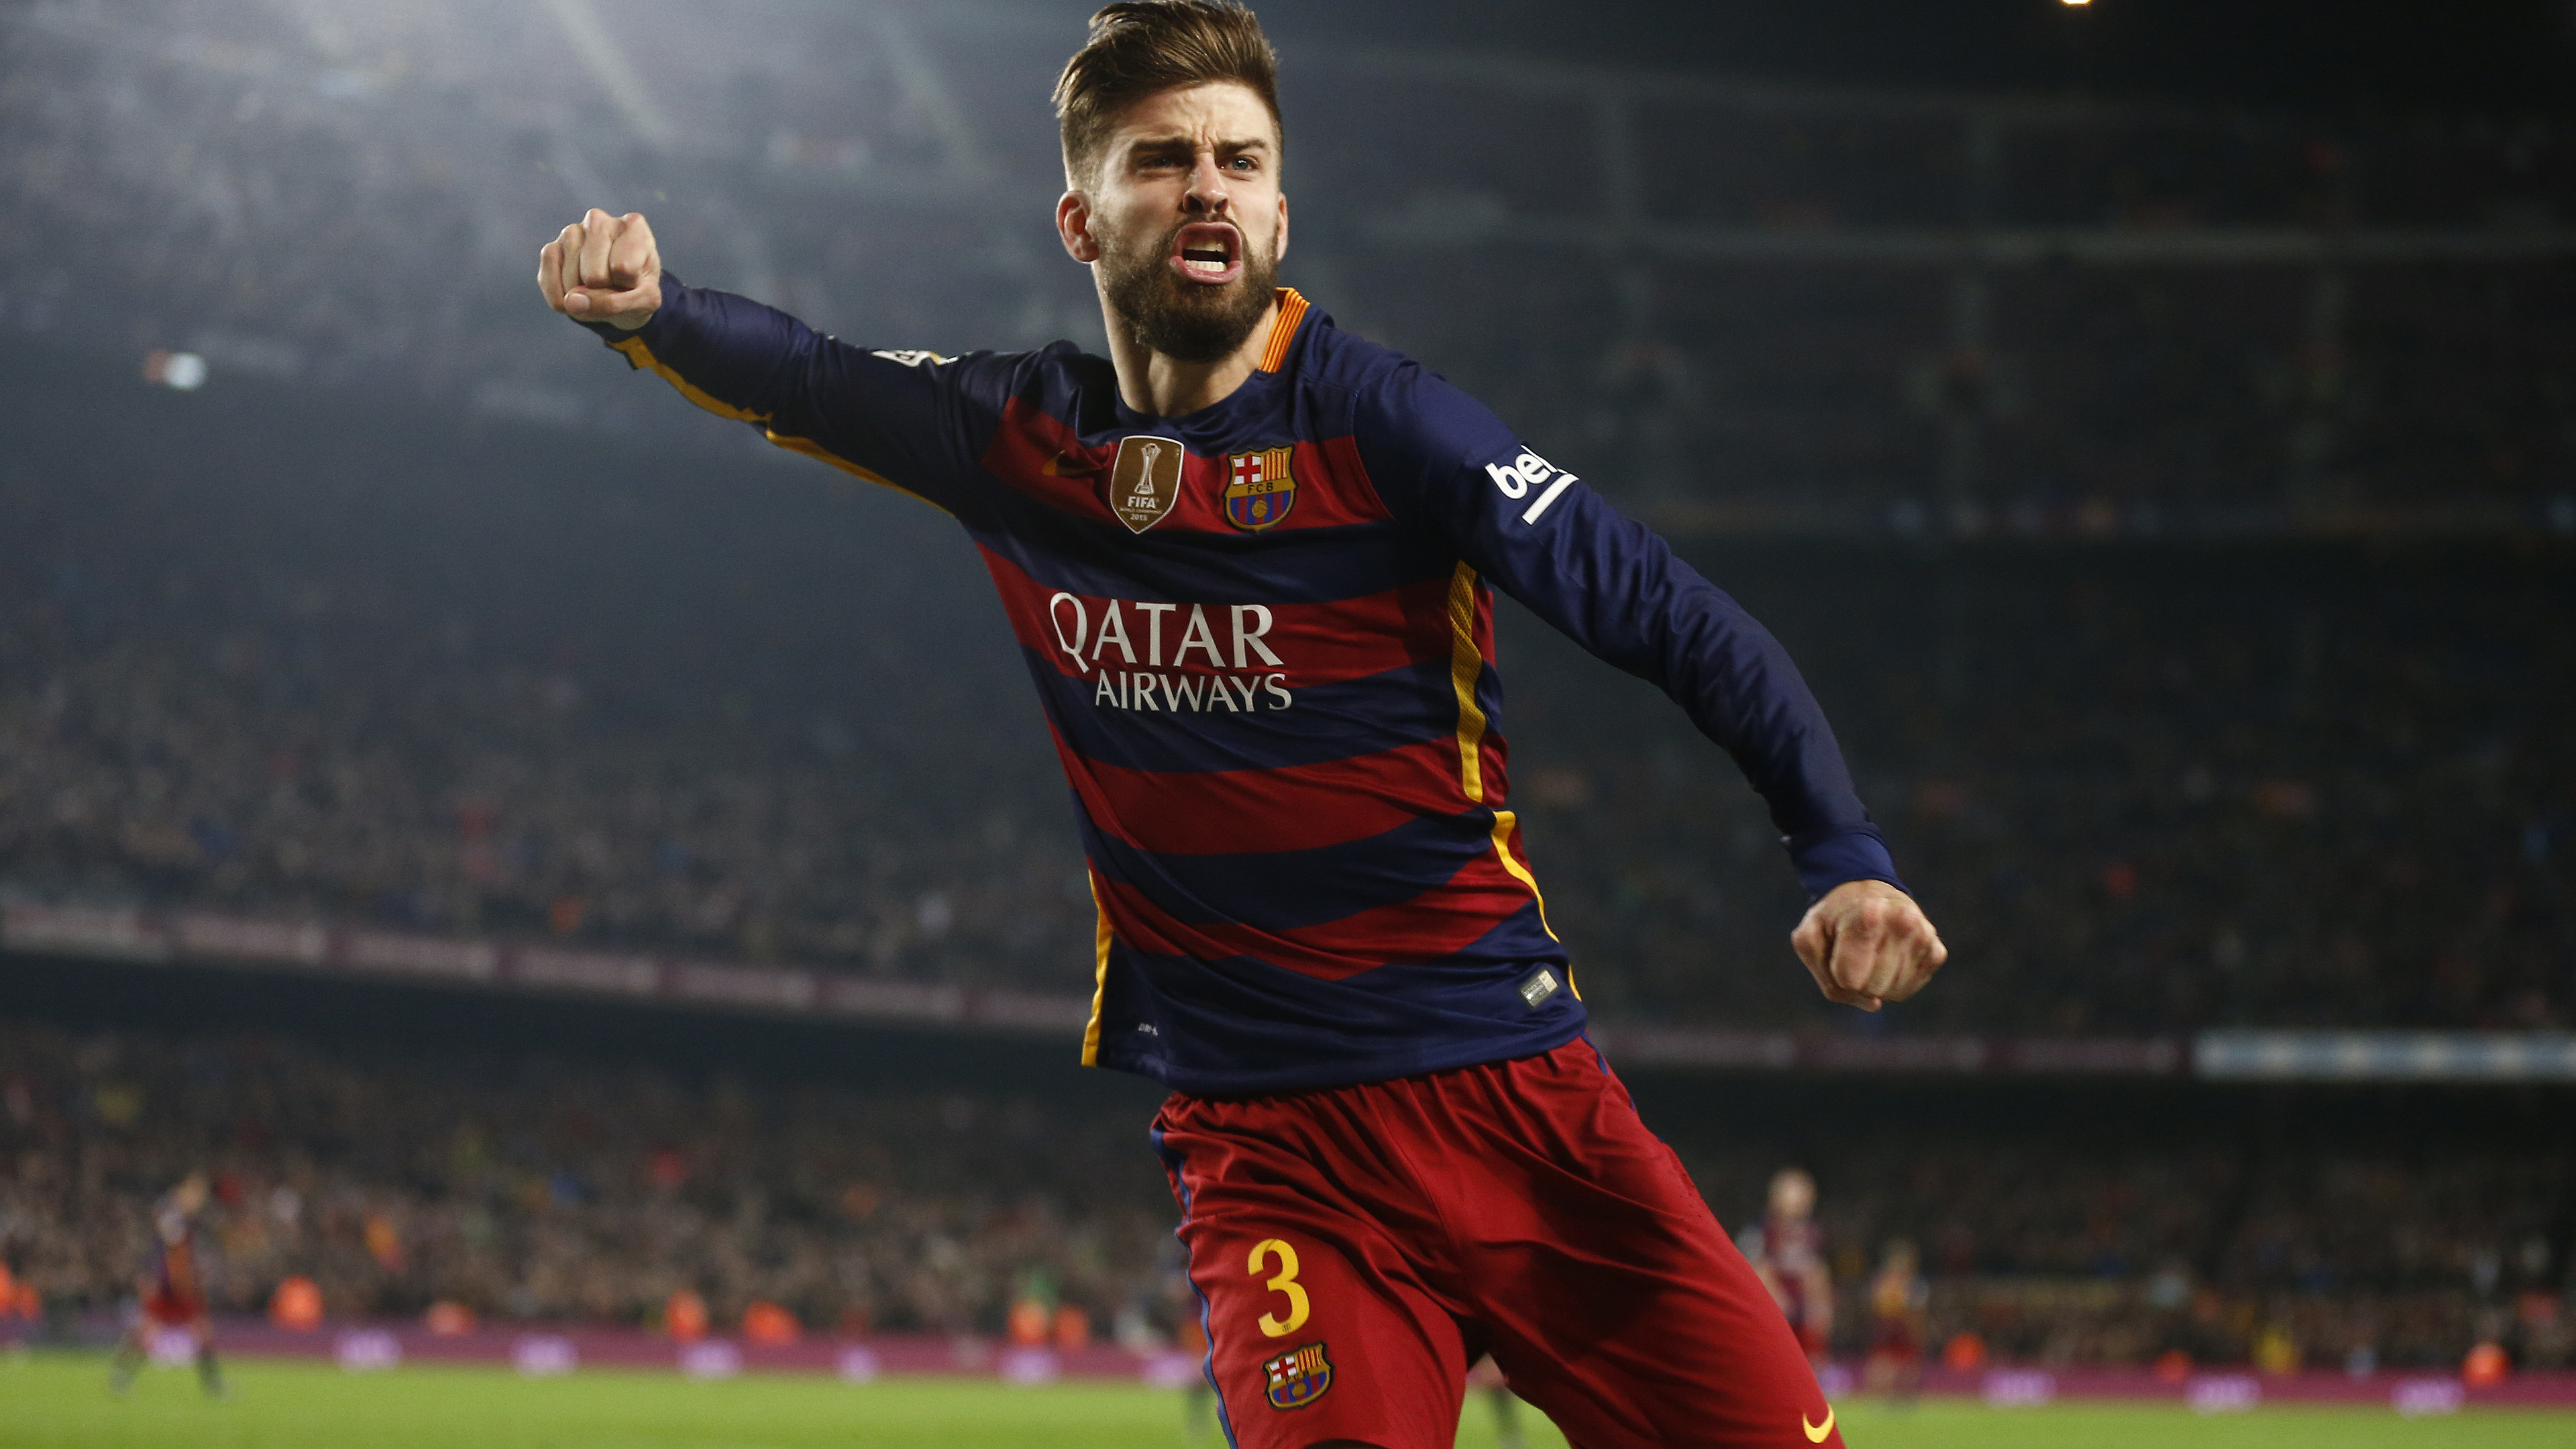 Gerard Pique: A Spanish former professional footballer who played as a center-back. 3840x2160 4K Background.